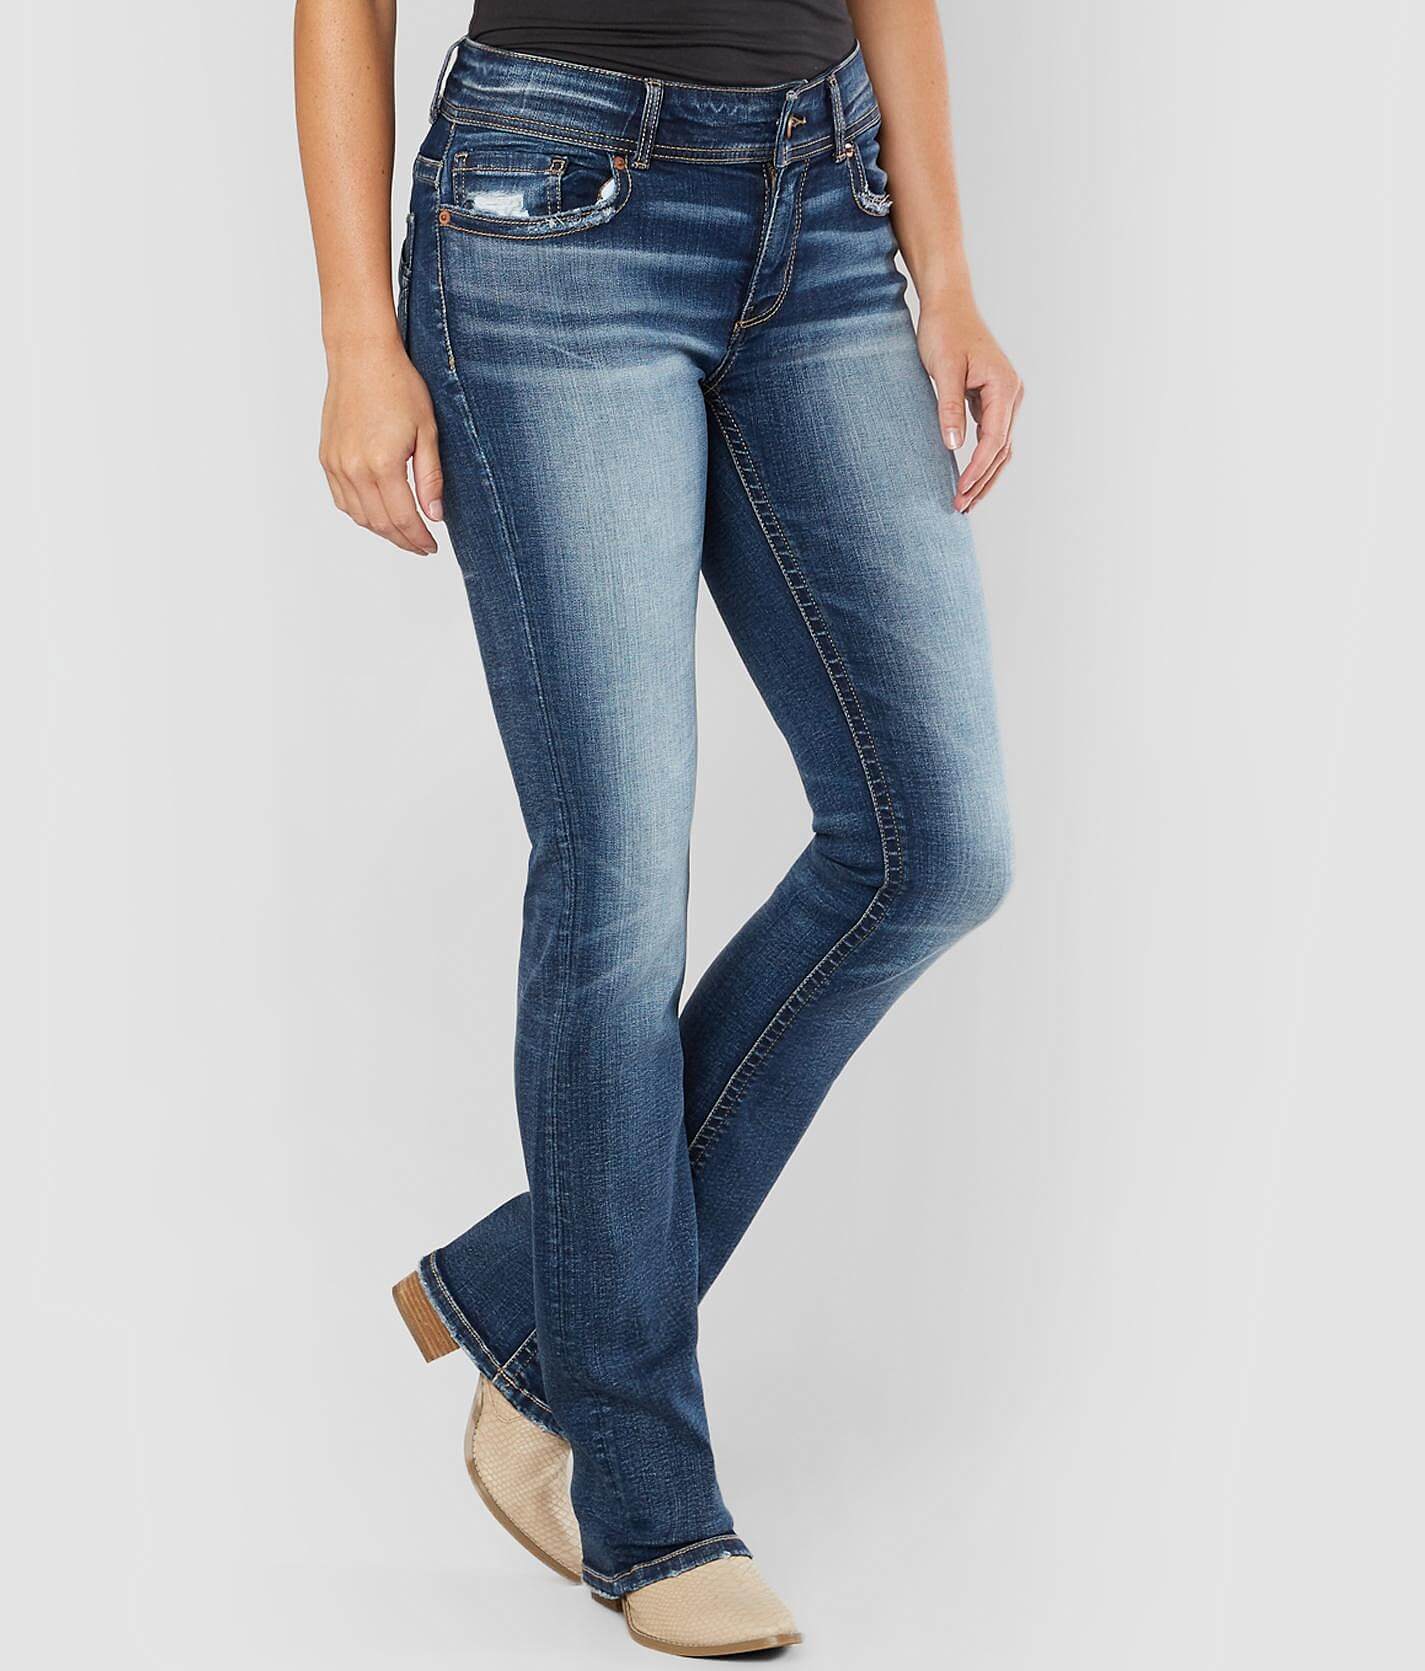 tailored jeans womens